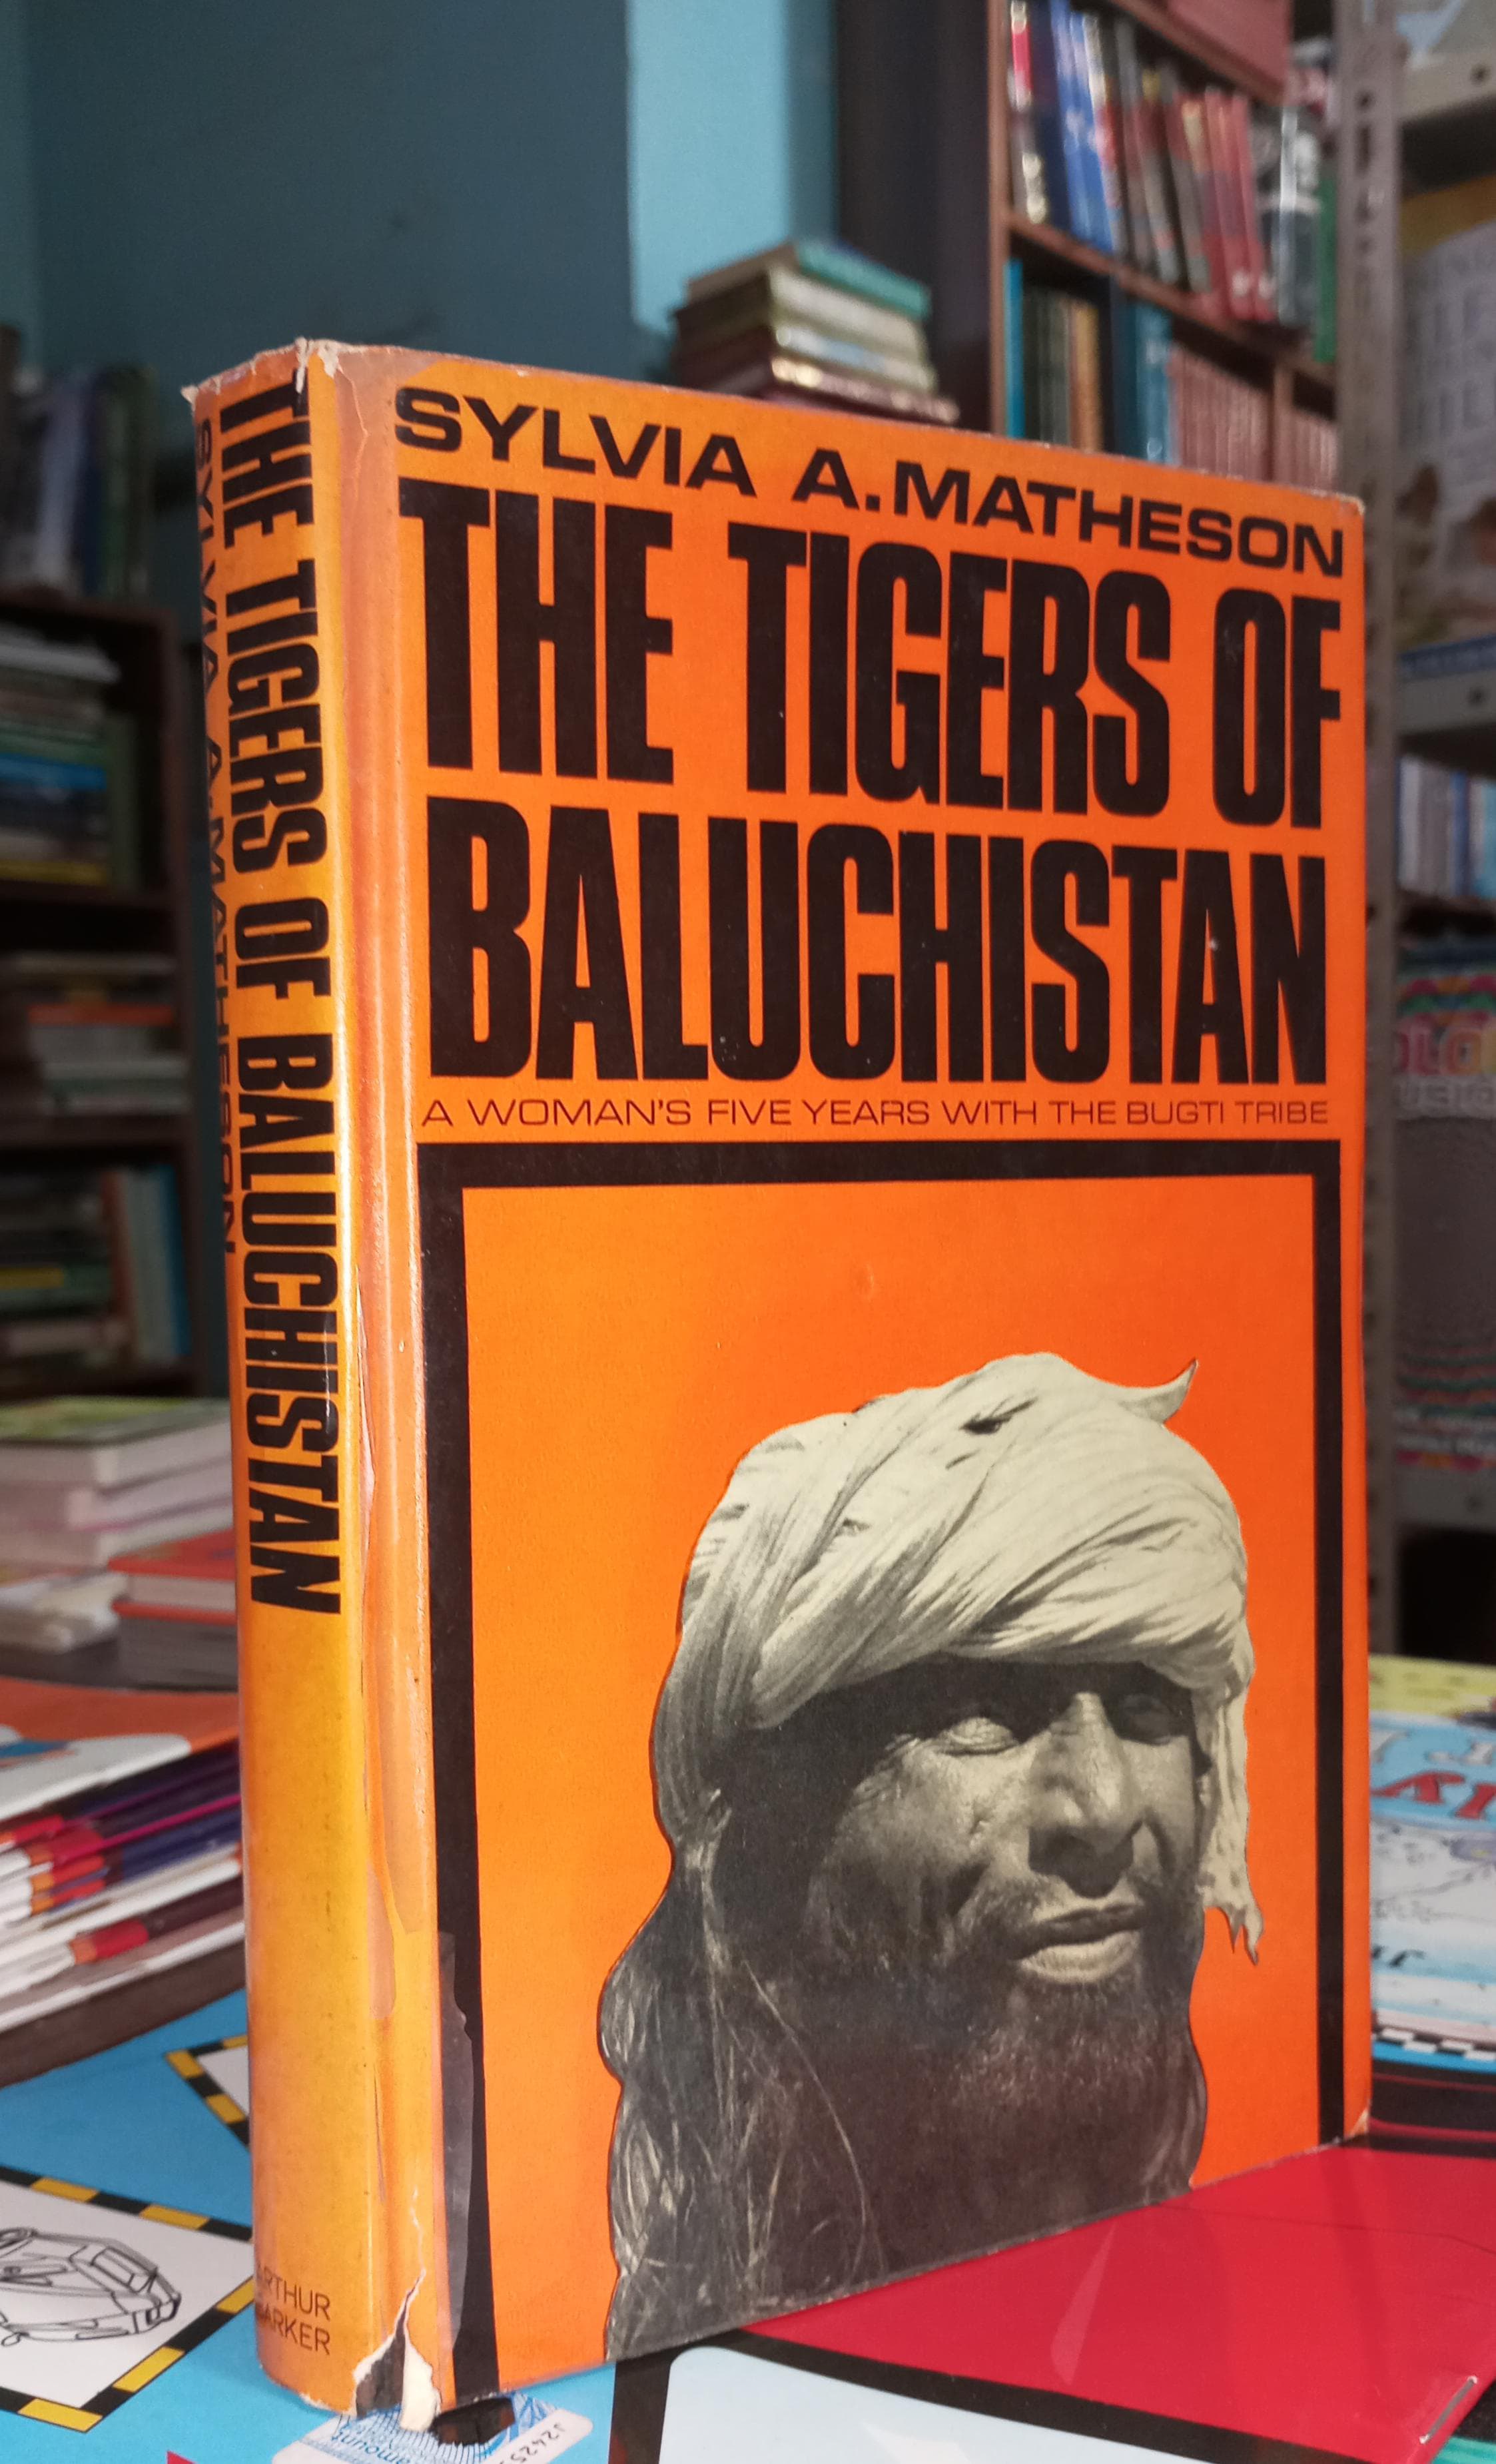 tigers of baluchistan by sylvia a. matheson